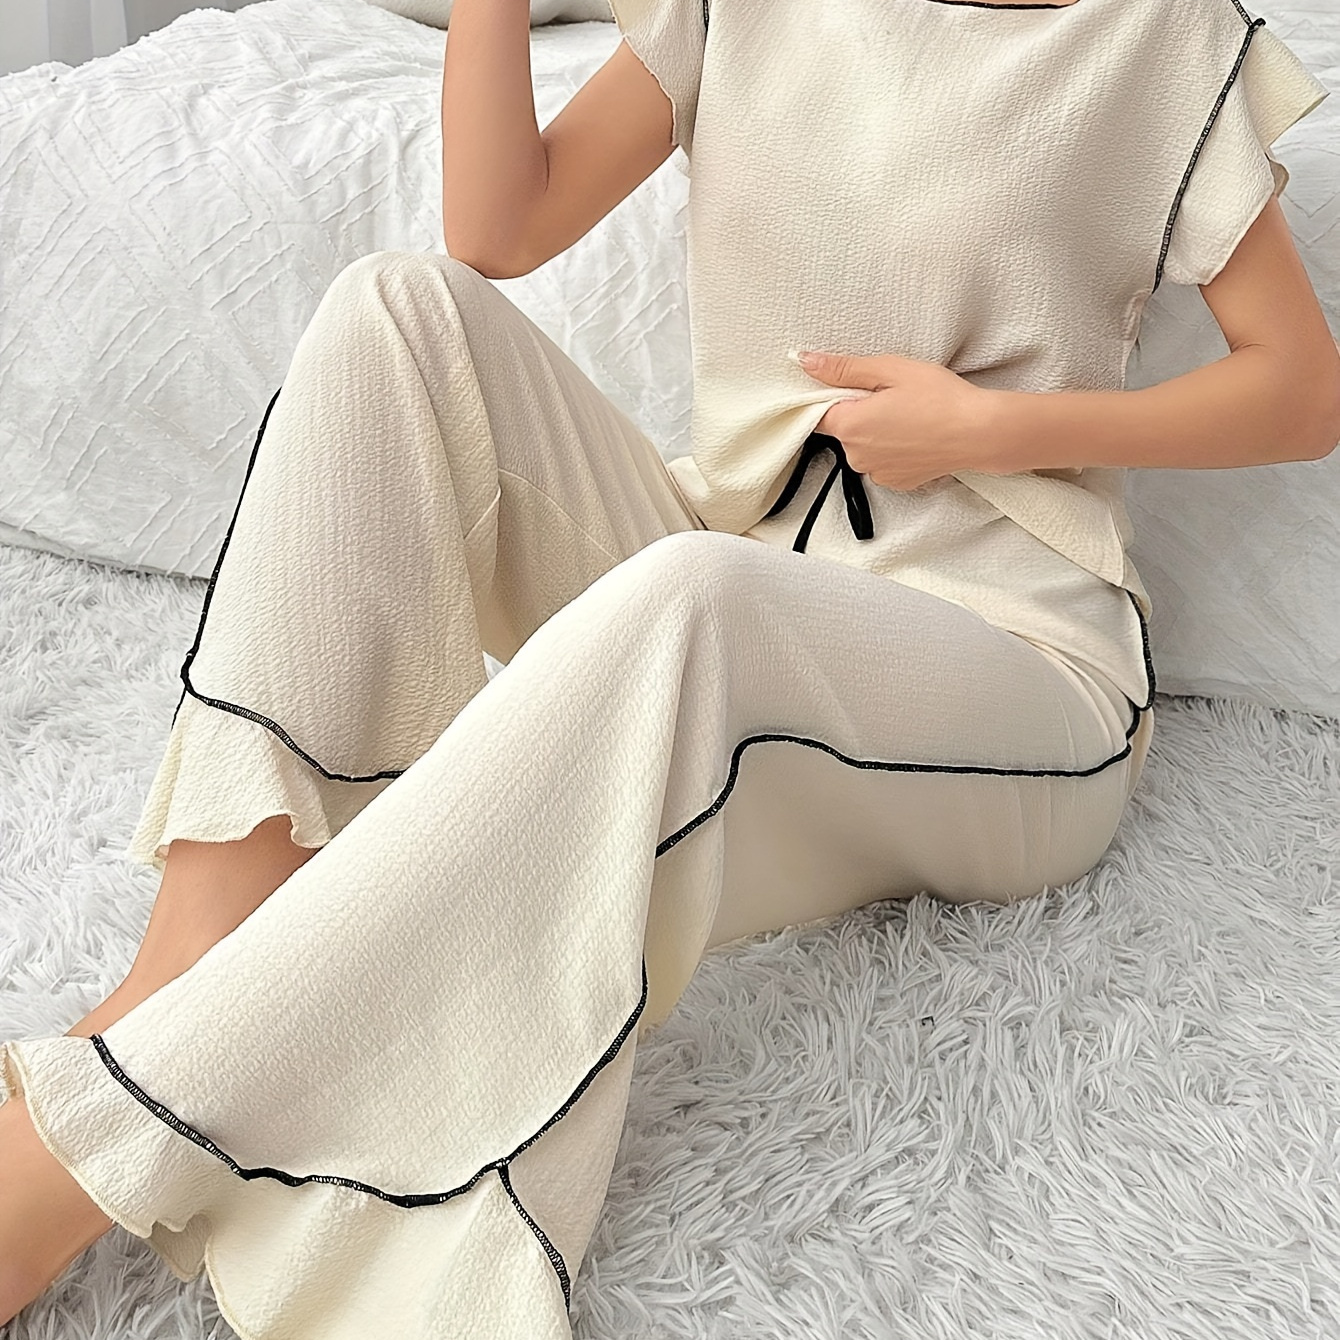 

Women's Elegant Solid Textured Seam Show Ruffle Hem Pajama Set, Cap Sleeve Round Neck Top & Pants, Comfortable Relaxed Fit